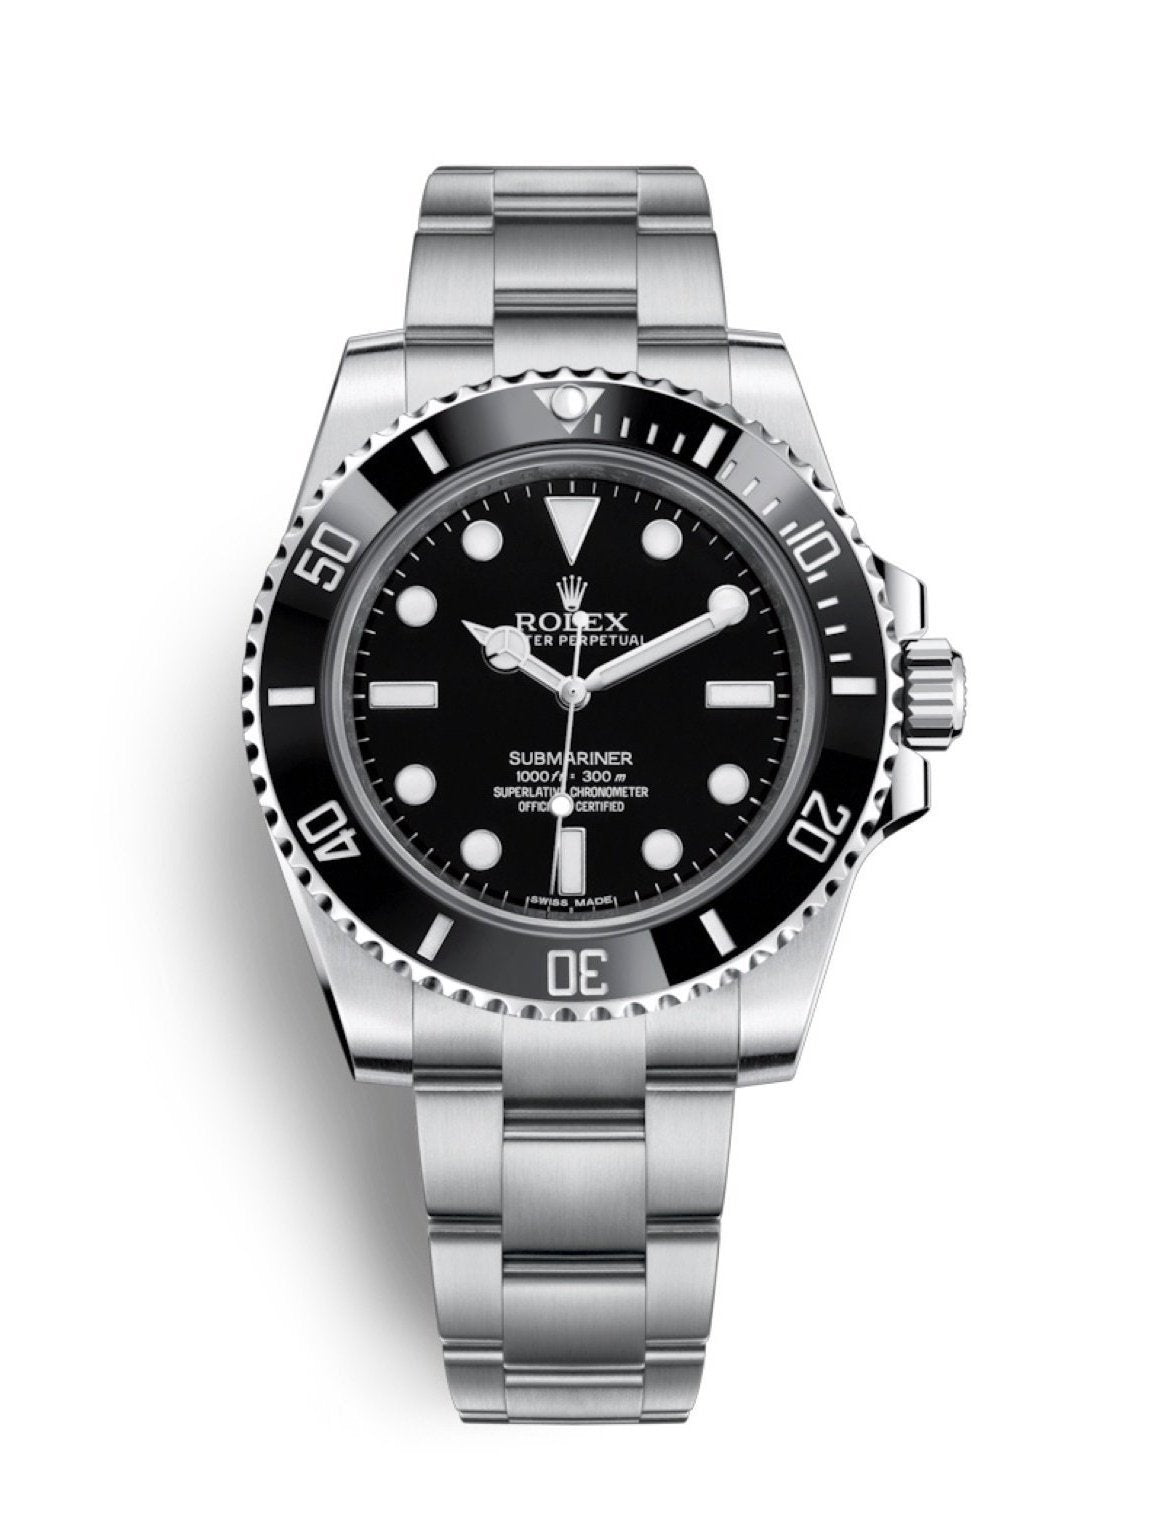 Rolex Submariner Stainless Steel at 